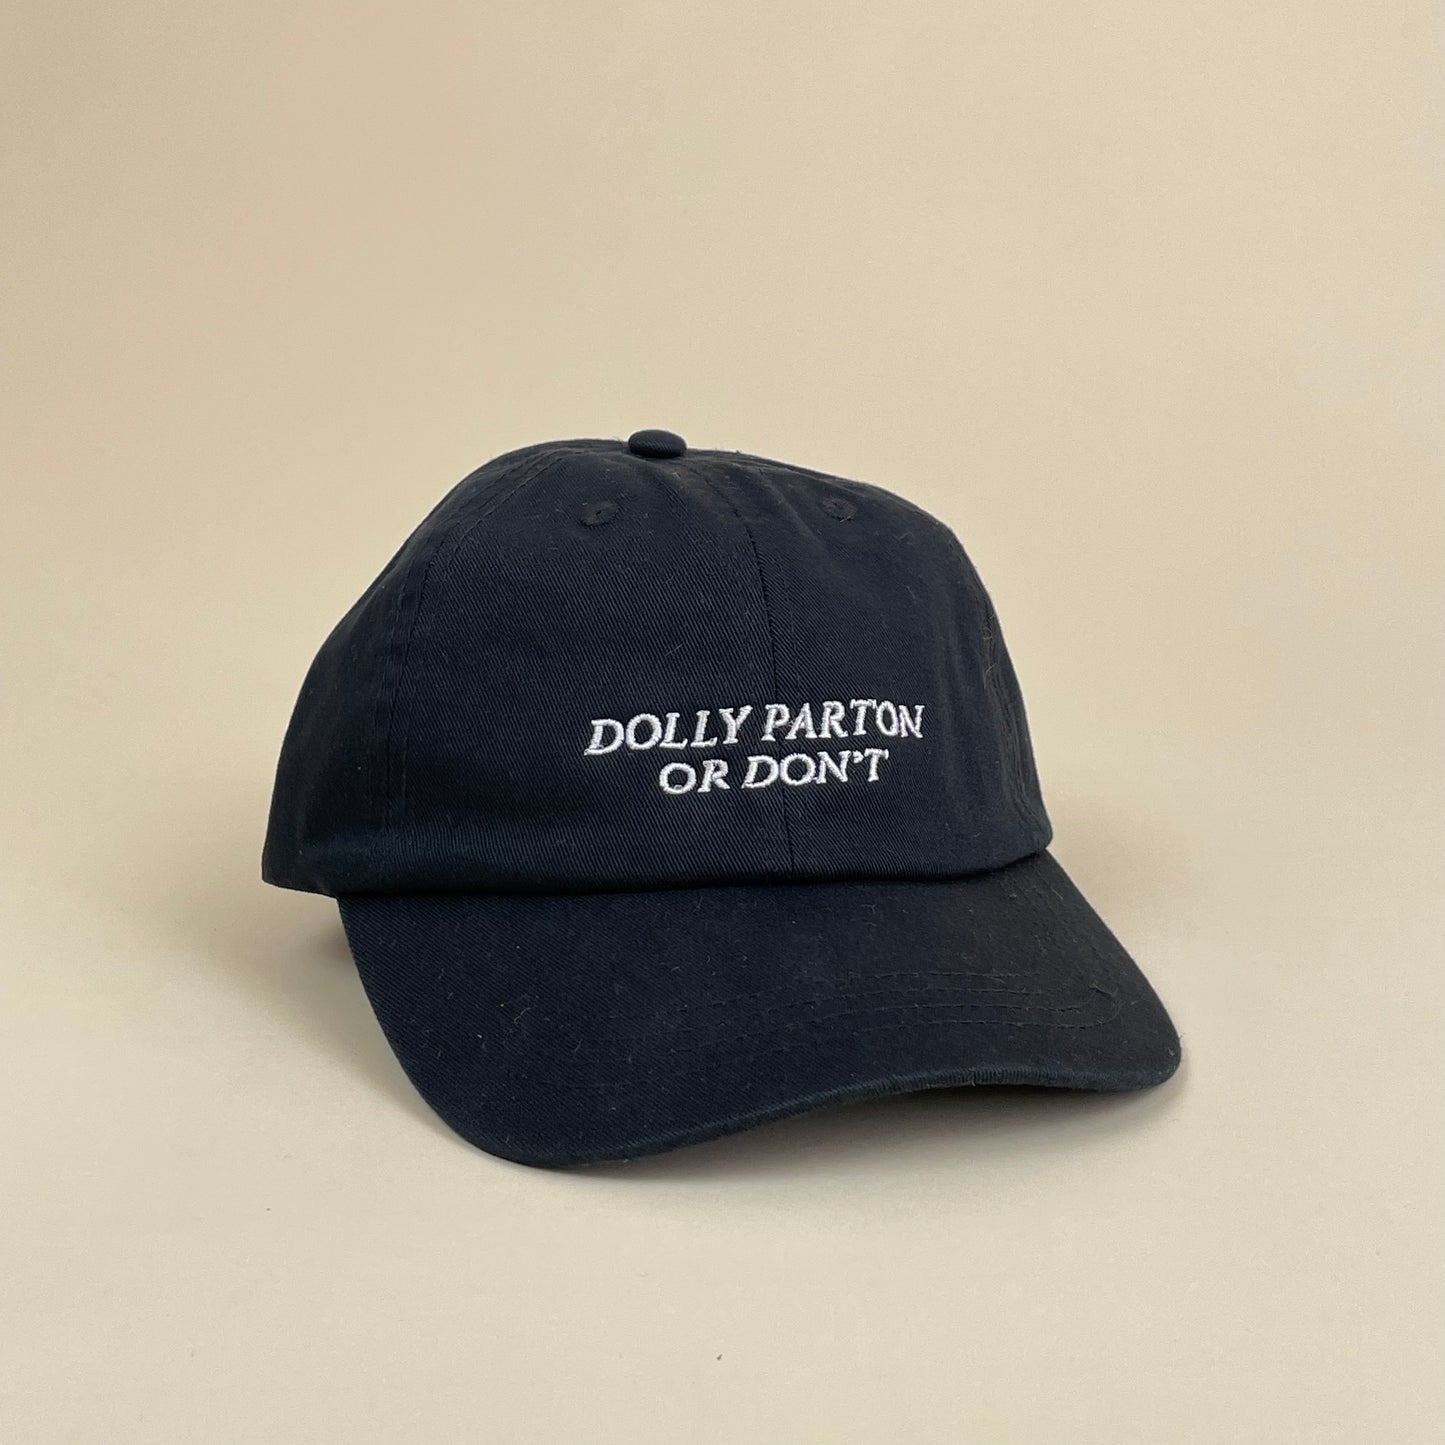 Hat, Dolly Parton or don't, (black/white)